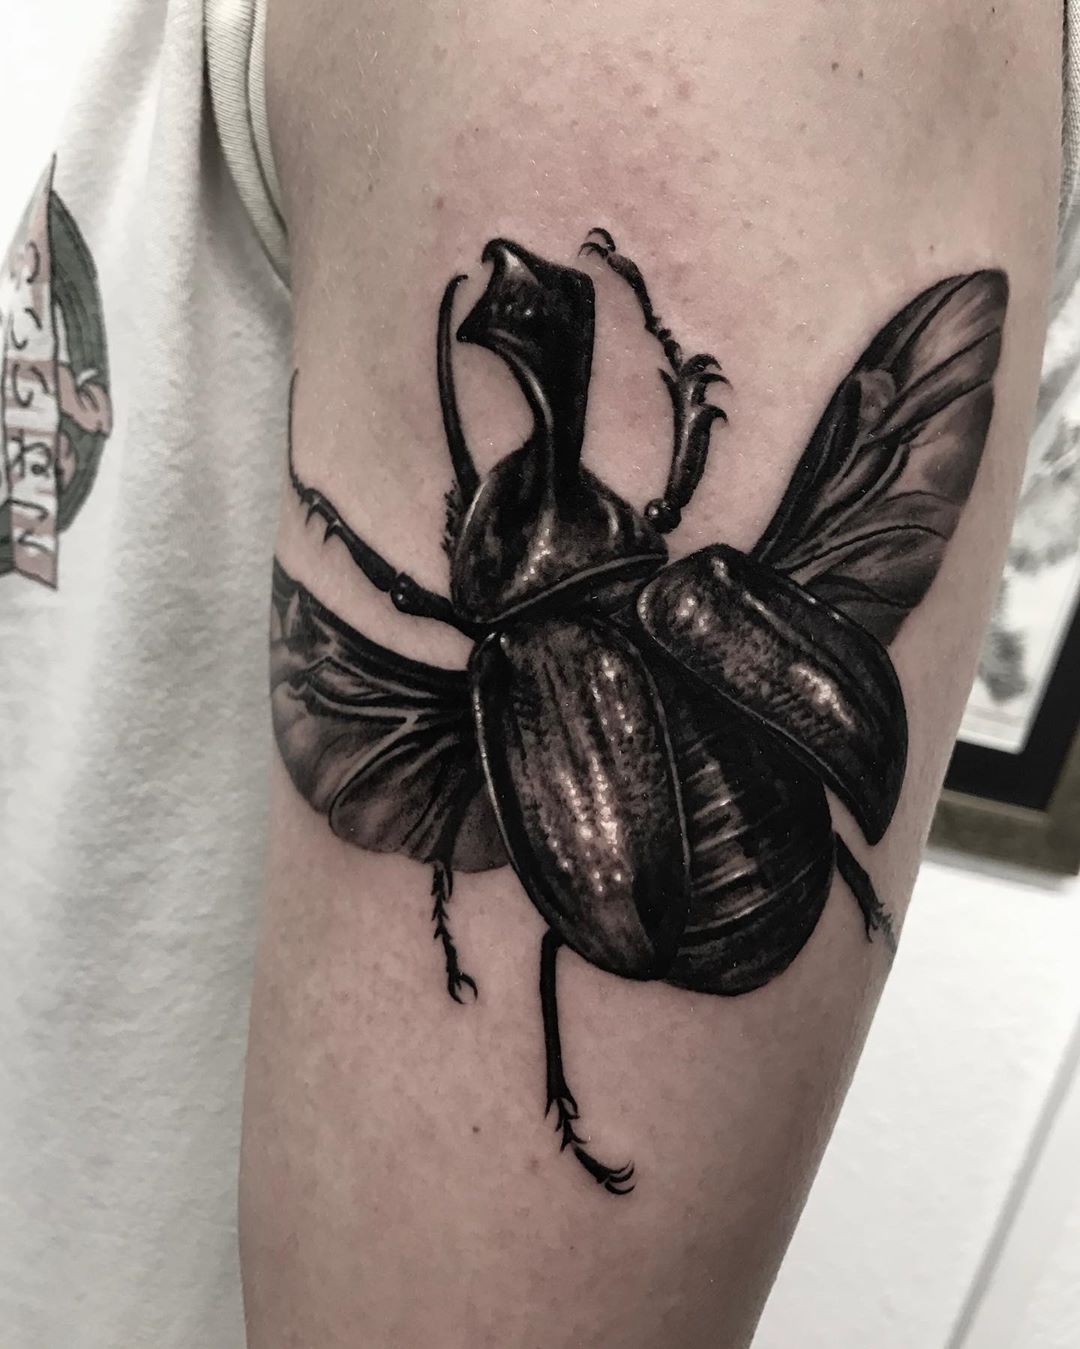 🖤Rhinoceros beetle / Golofa Claviger
Thanks so much for making the trip down Felix! This will be part of a bigger piece and can’t wait to carry on 👏🏻Thanks for letting me run with such a fun idea 🤸🏻‍♀️ more like this pleeeease 🙏🏻
See you next...